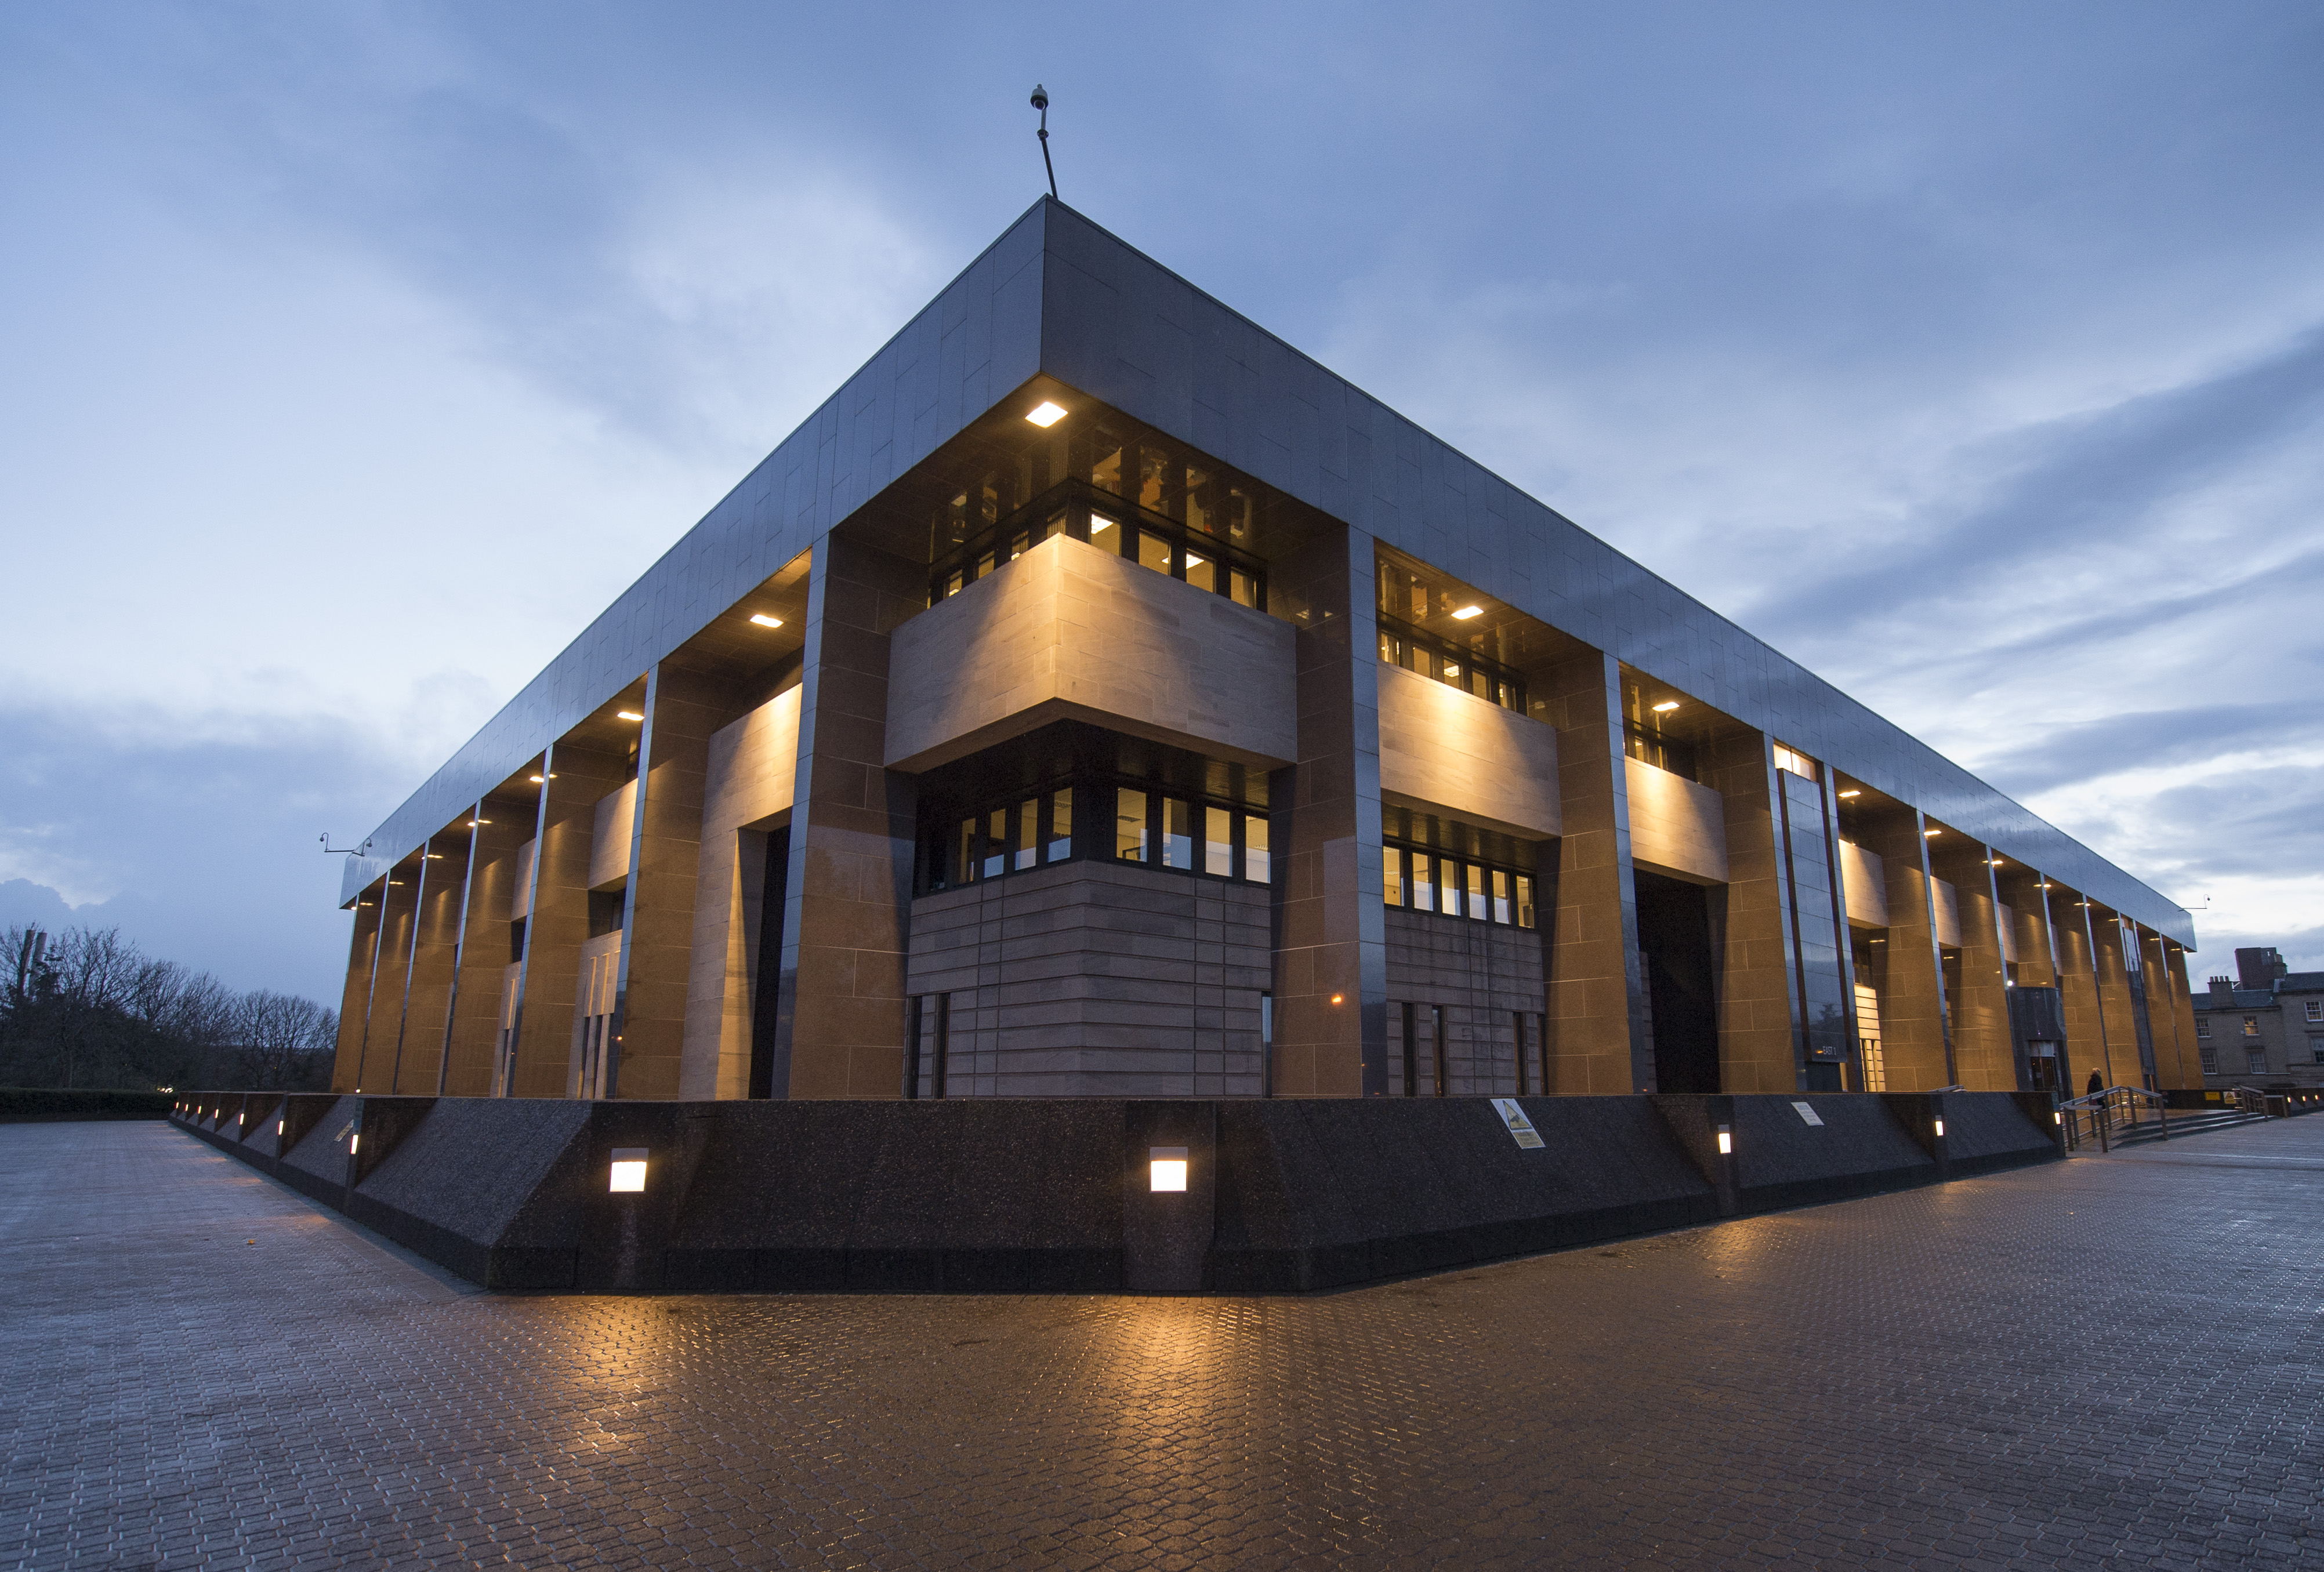 Glasgow Sheriff Court and Justice of the Peace Court